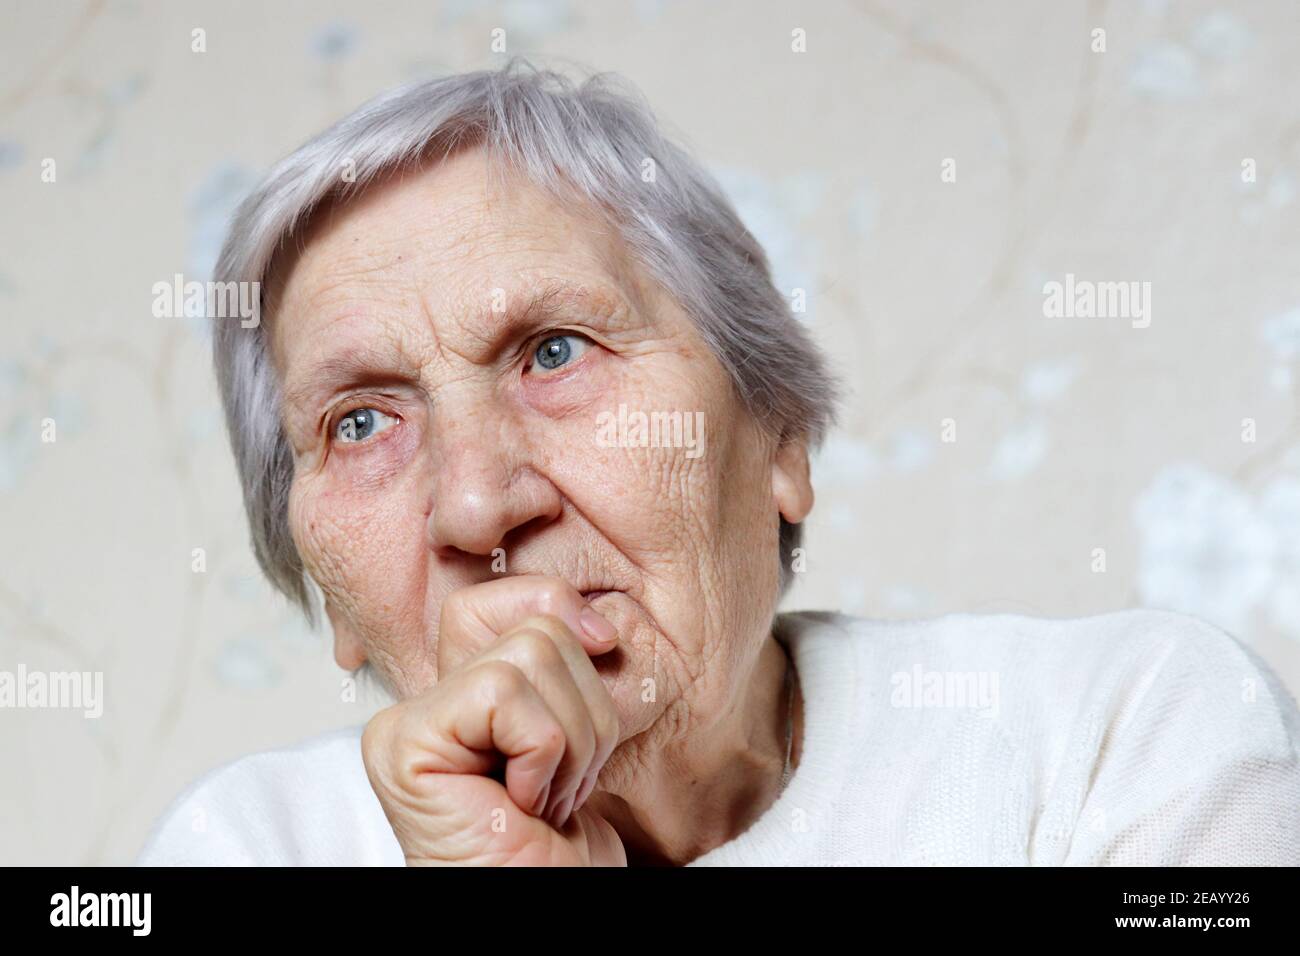 Elderly woman with peaceful expression thought about something. Female with gray hair and wrinkled skin, concept of memories, old age Stock Photo